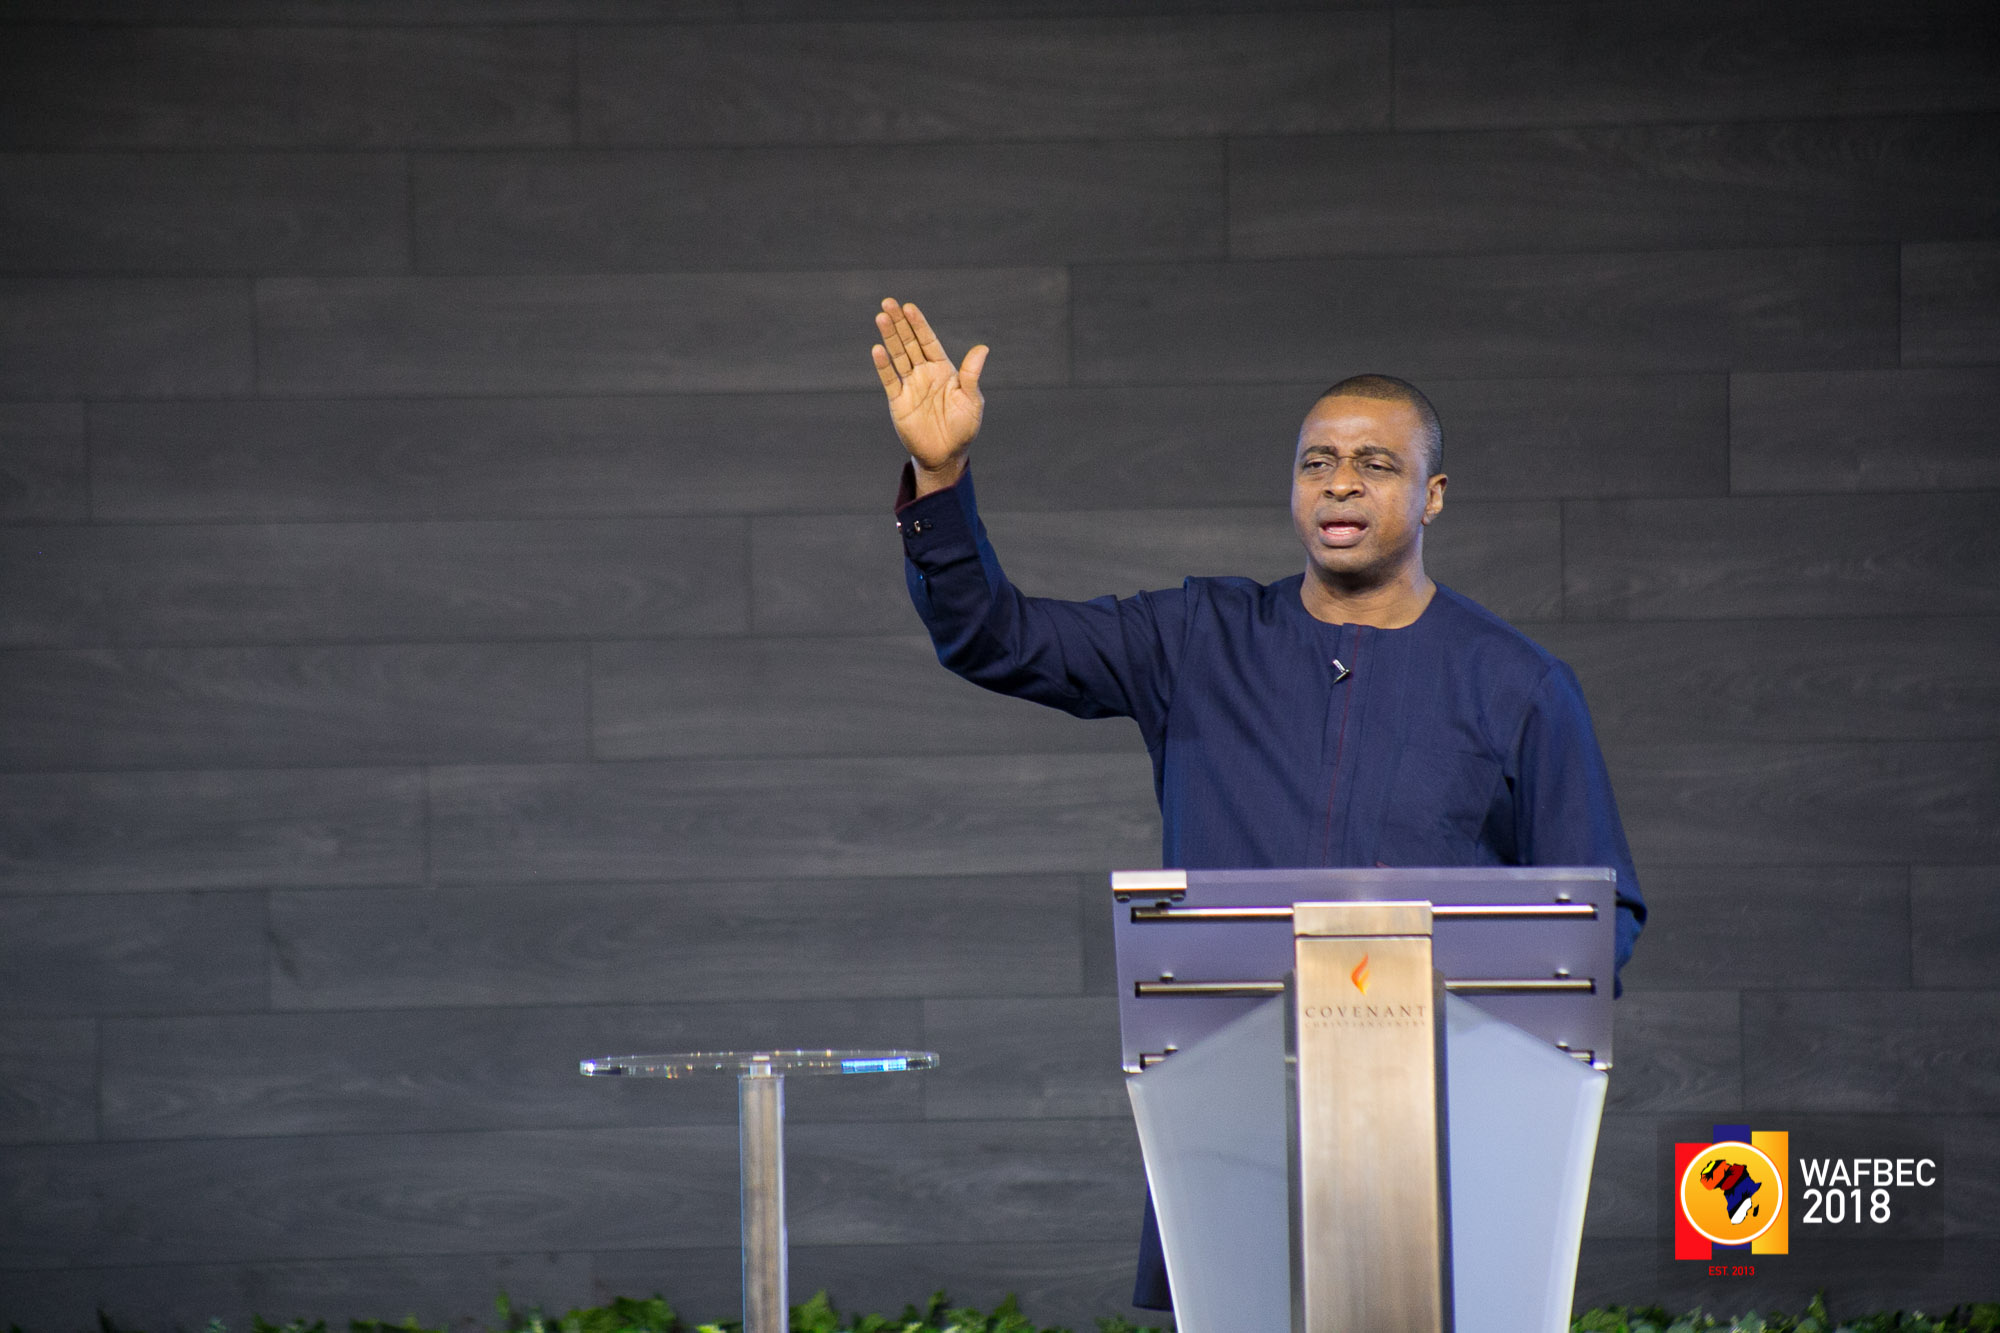 WAFBEC 2018 DAY 2 (AFTERNOON SESSION 3) with REV. VICTOR ADEYEMI